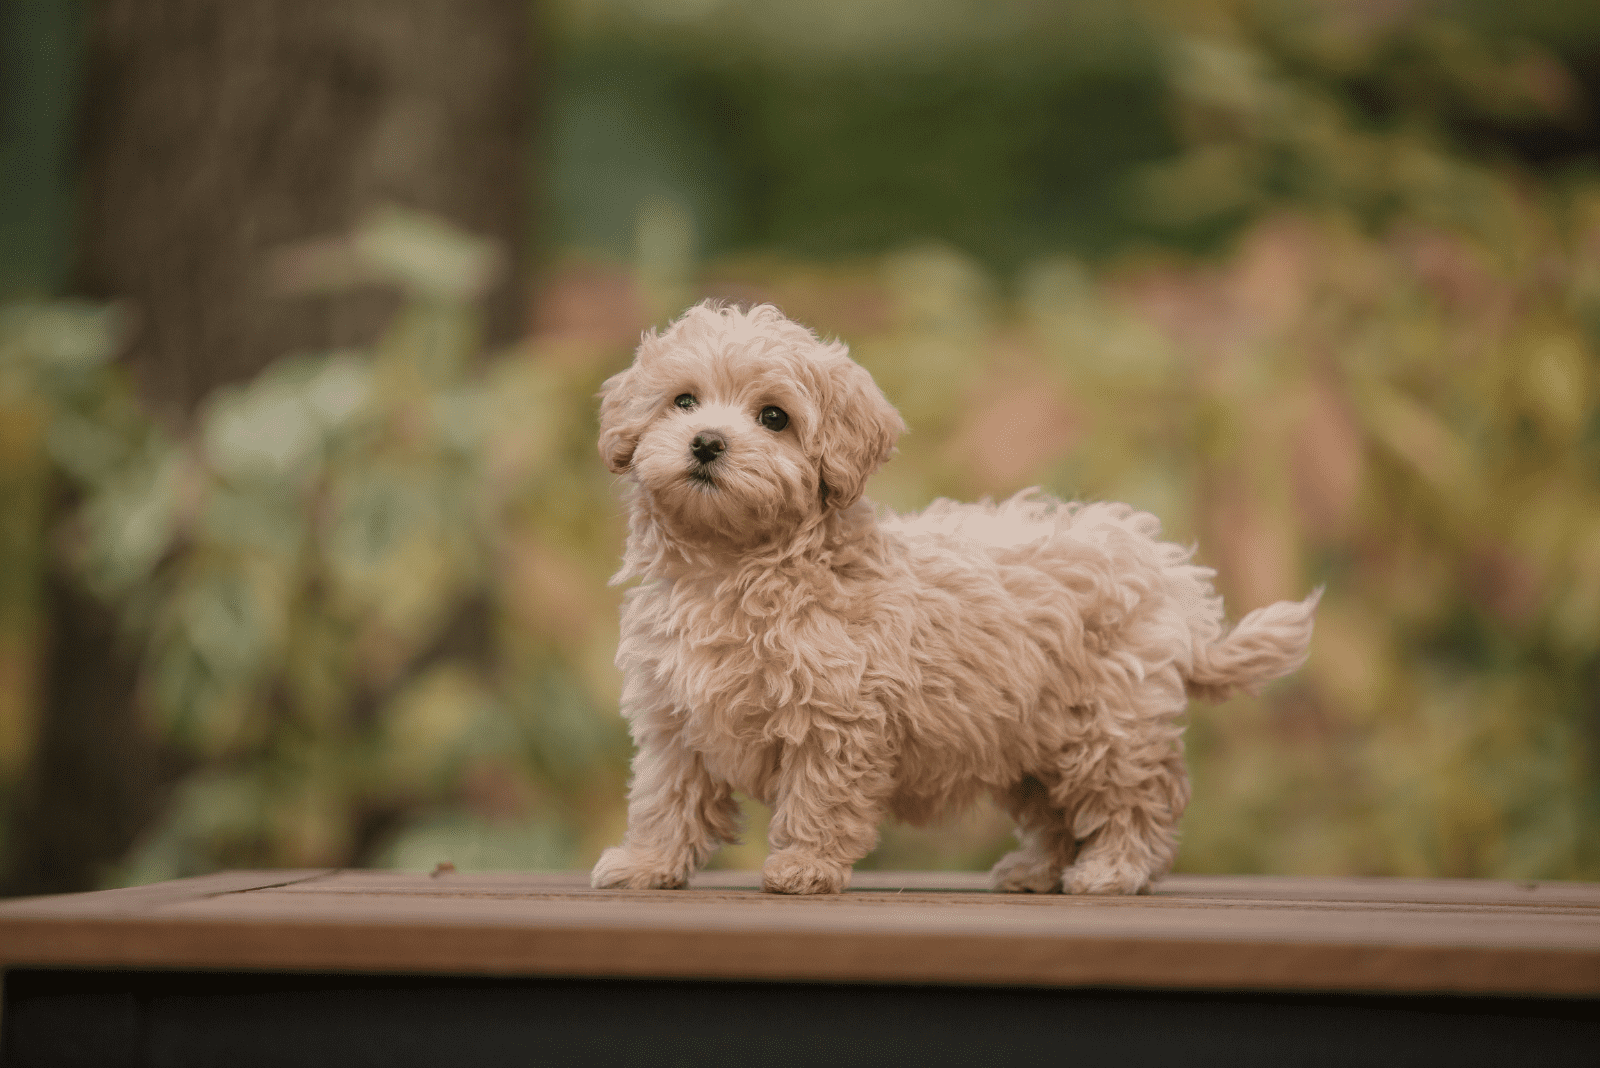 the adorable Maltipoo is standing on a wooden base